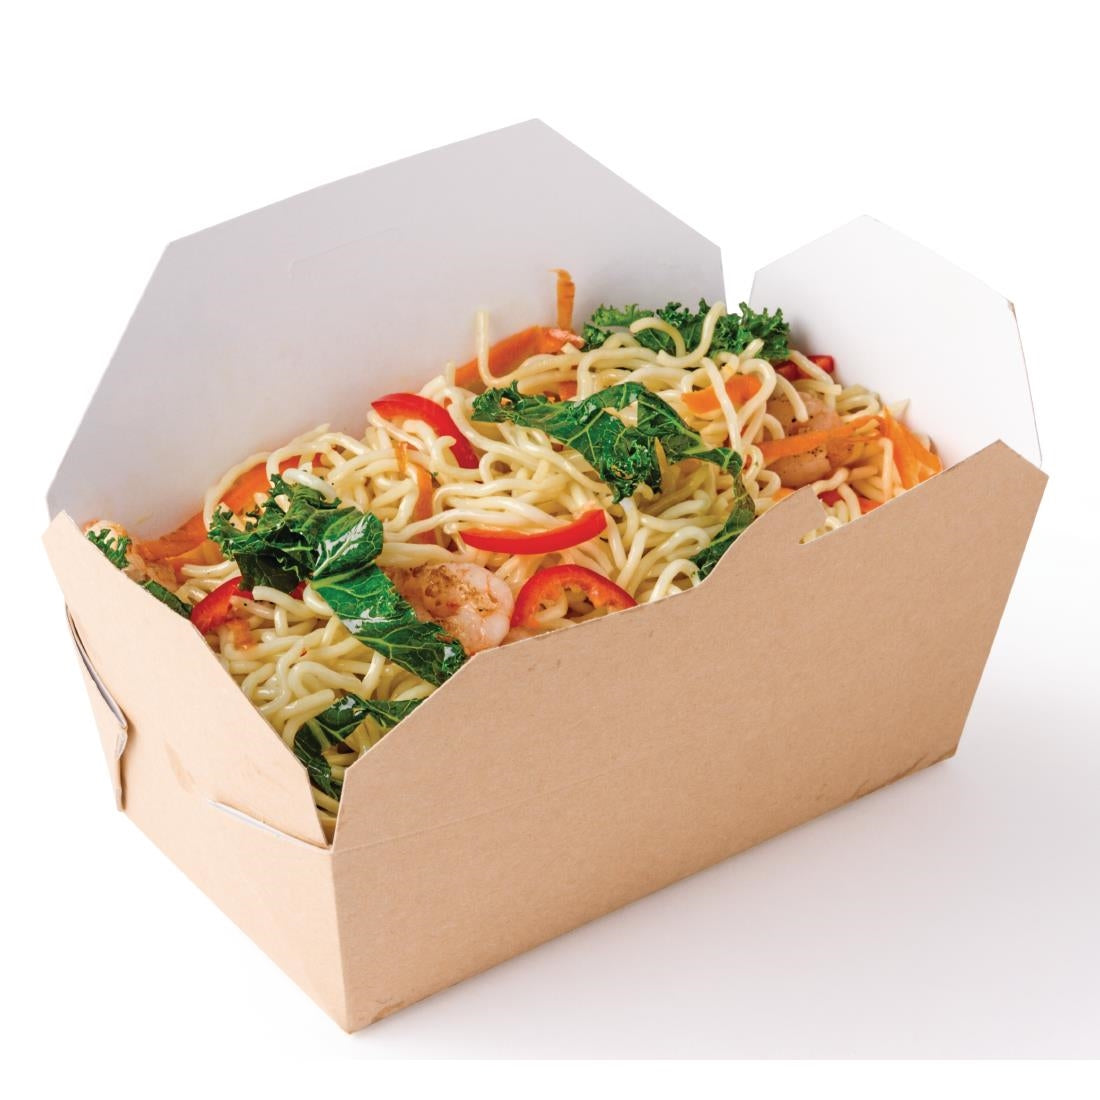 DM173 Colpac Recyclable Microwavable Food Boxes Rectangular 985ml / 34oz (Pack of 250) JD Catering Equipment Solutions Ltd